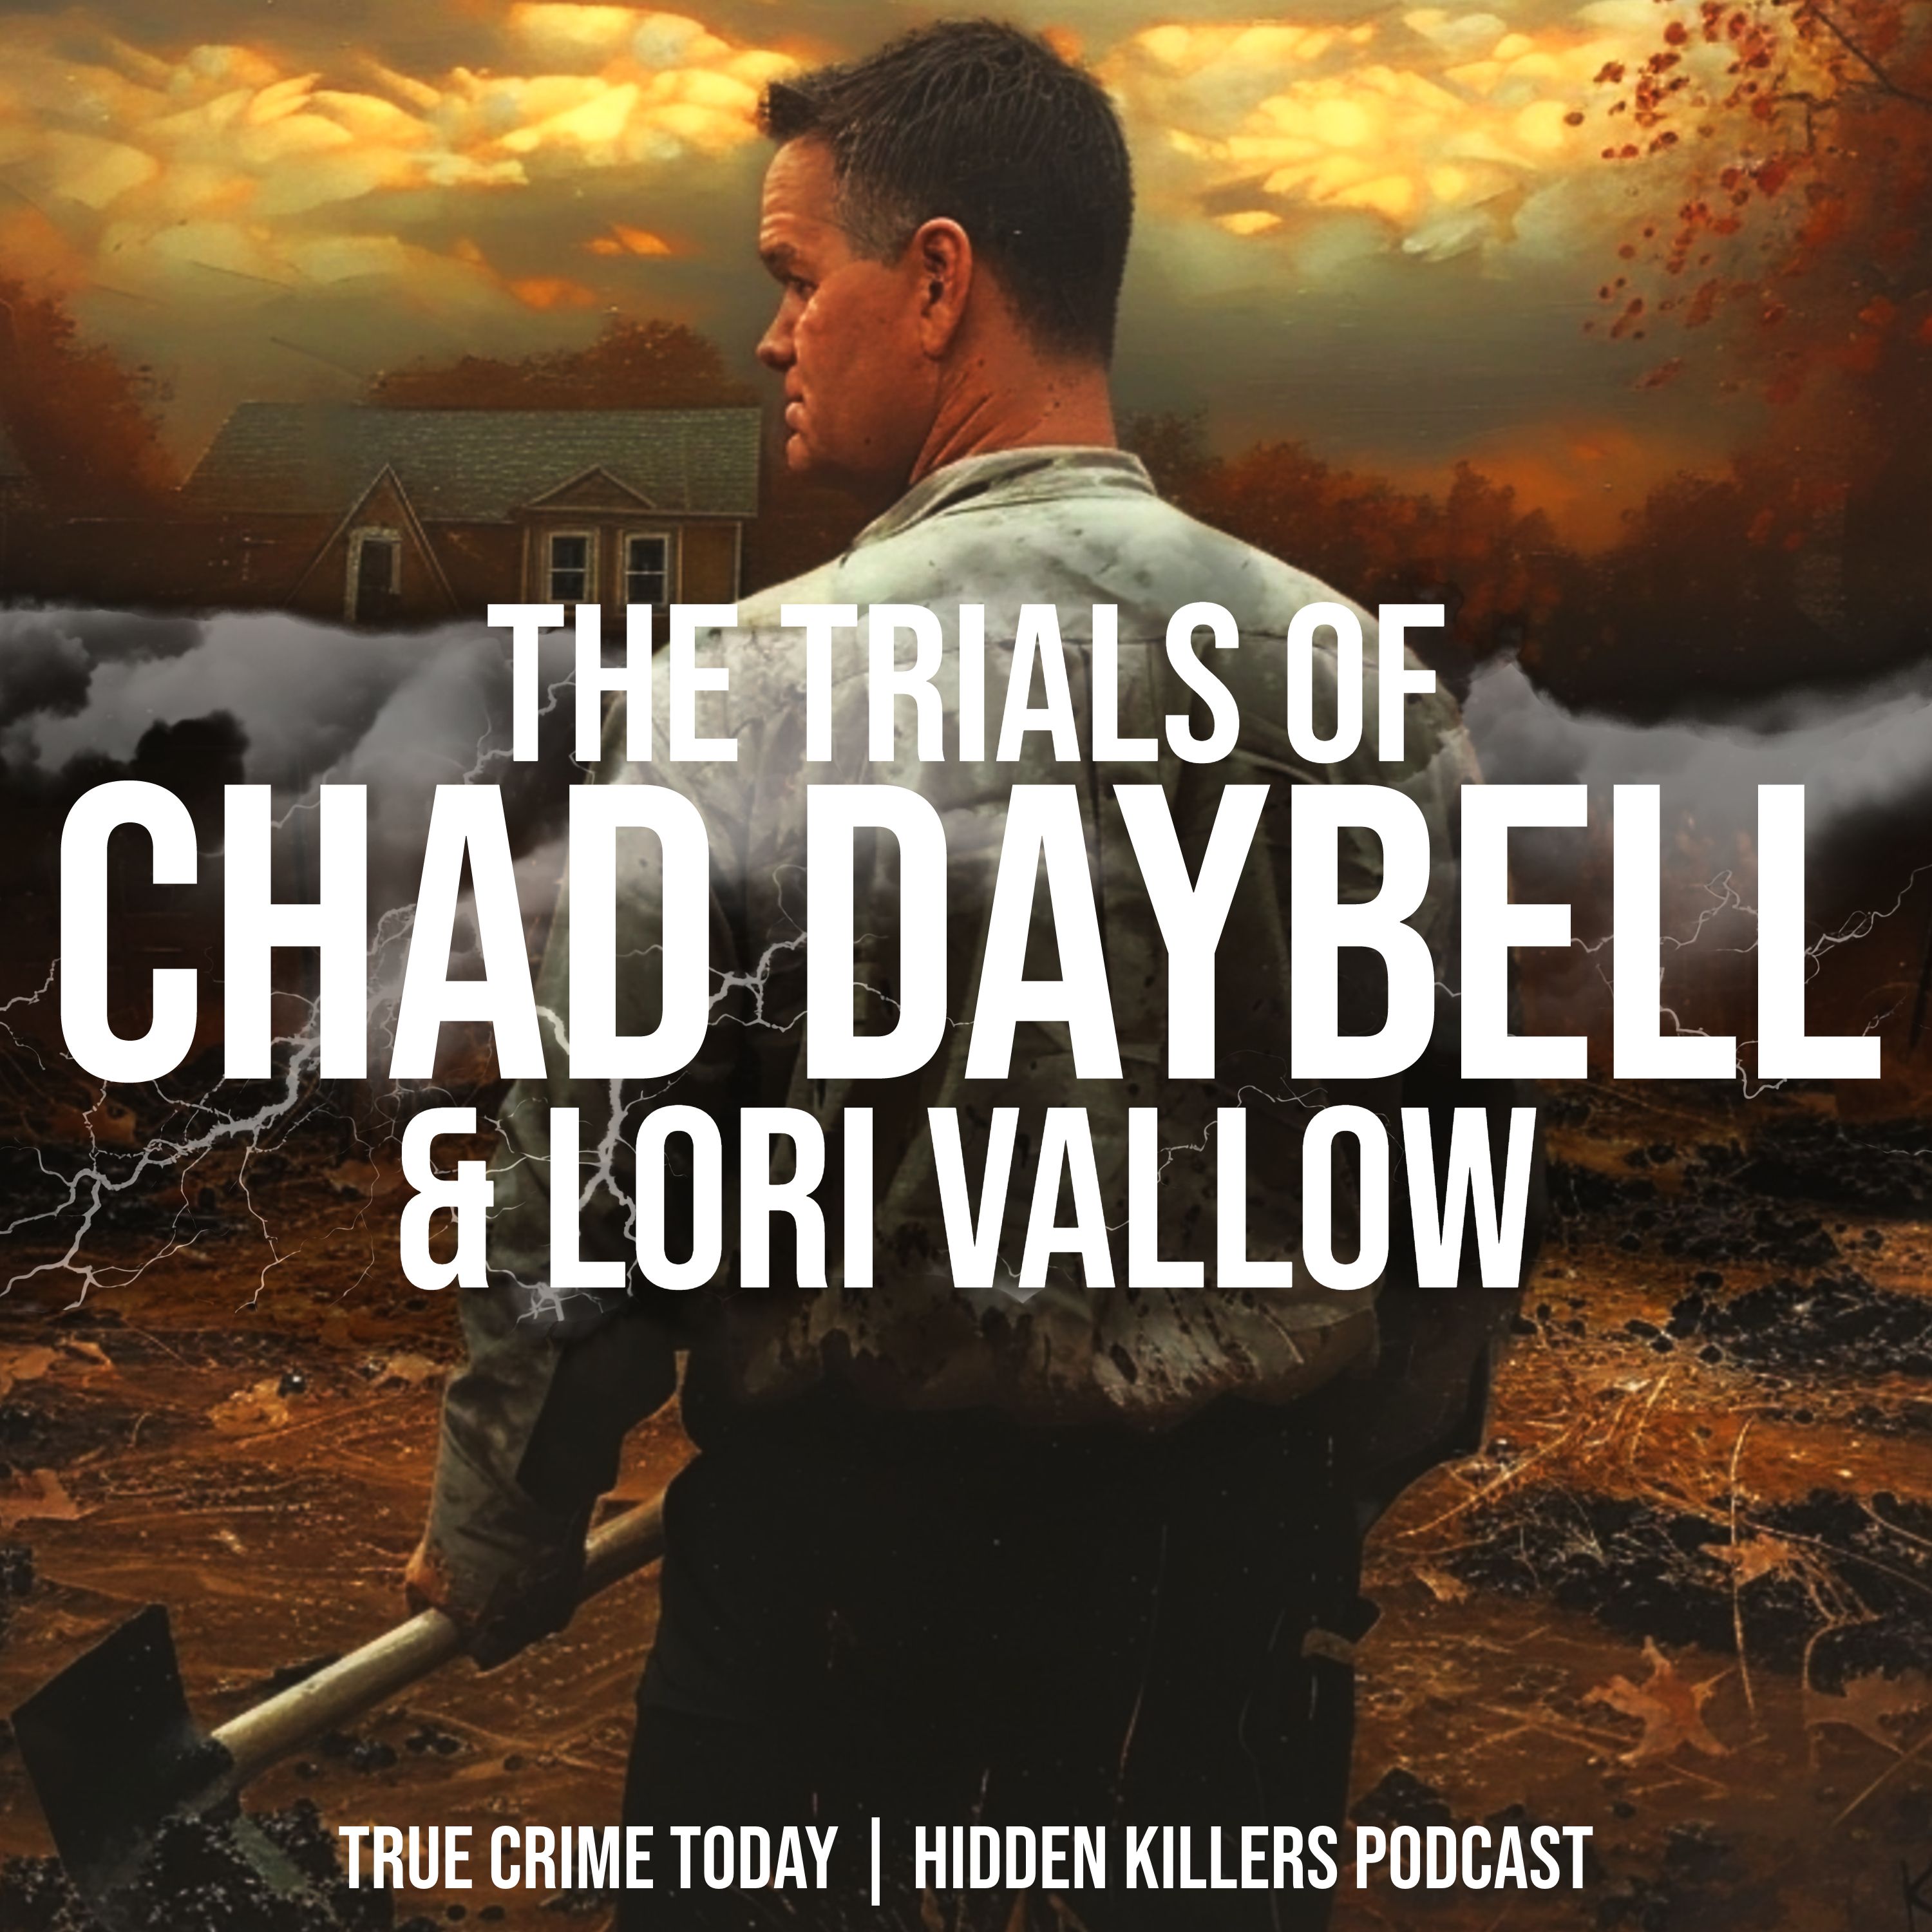 Attorney Eric Faddis Weighs In Could Chad Daybell’s Words to His Daughter Indicate Guilt? -WEEK IN REVIEW